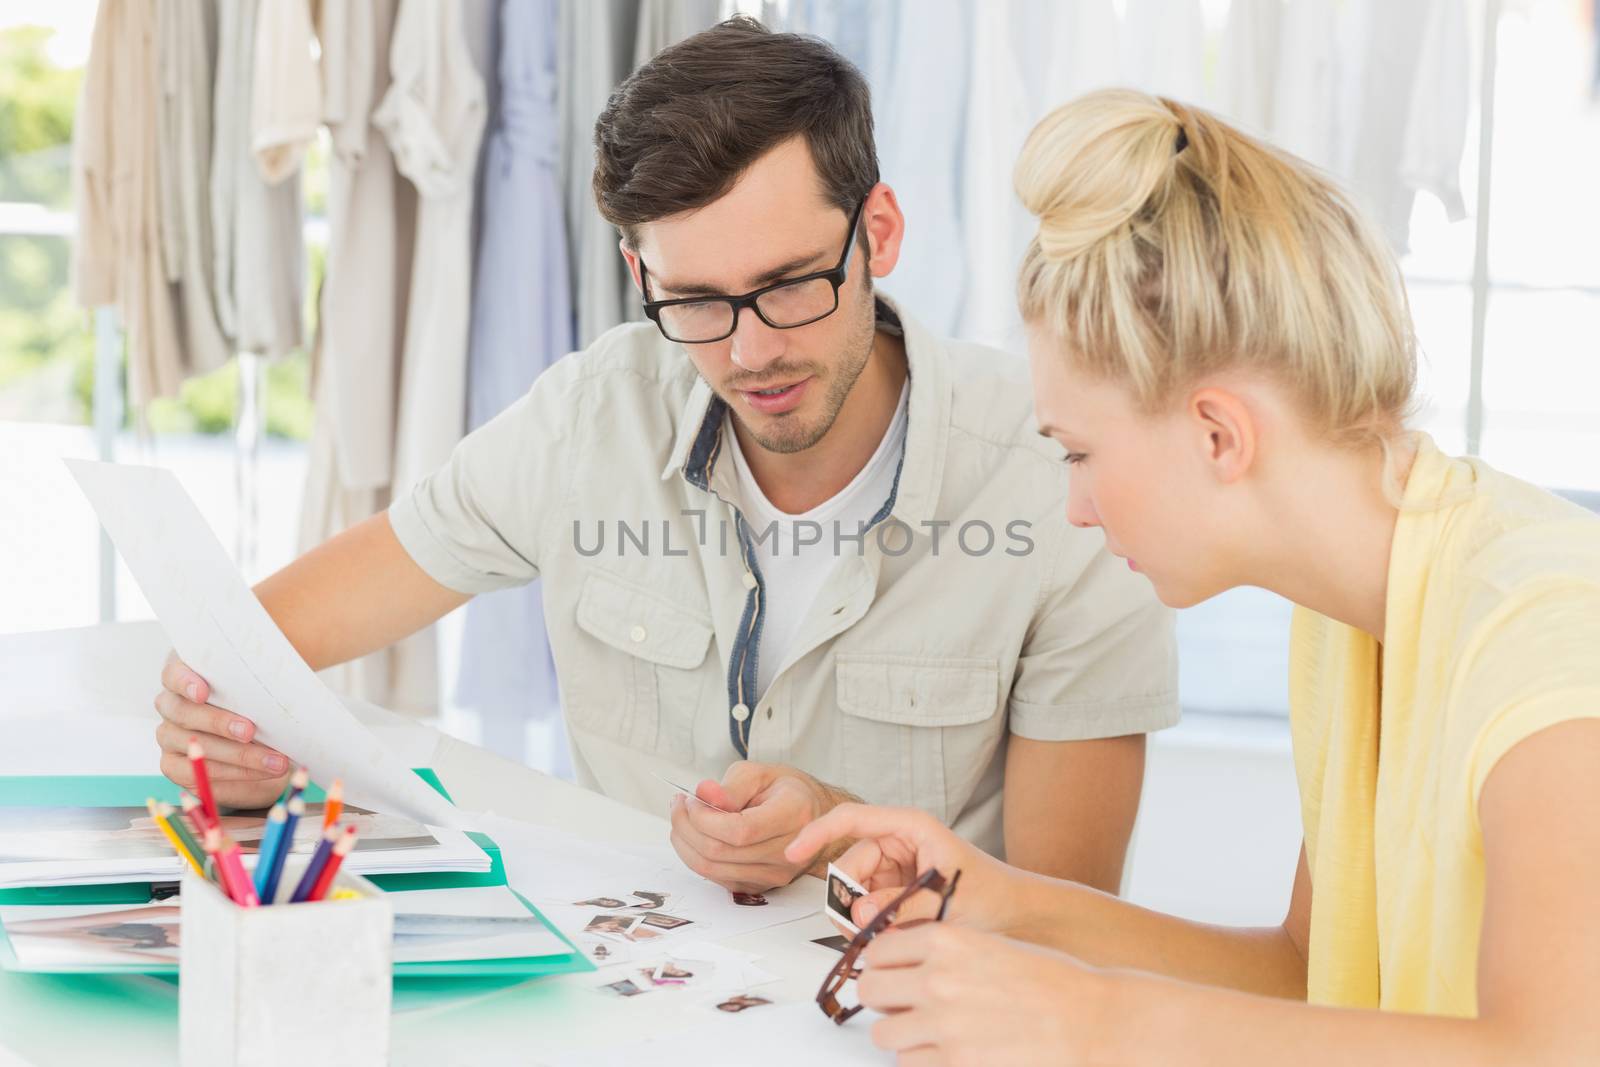 Two fashion designers discussing designs in a studio